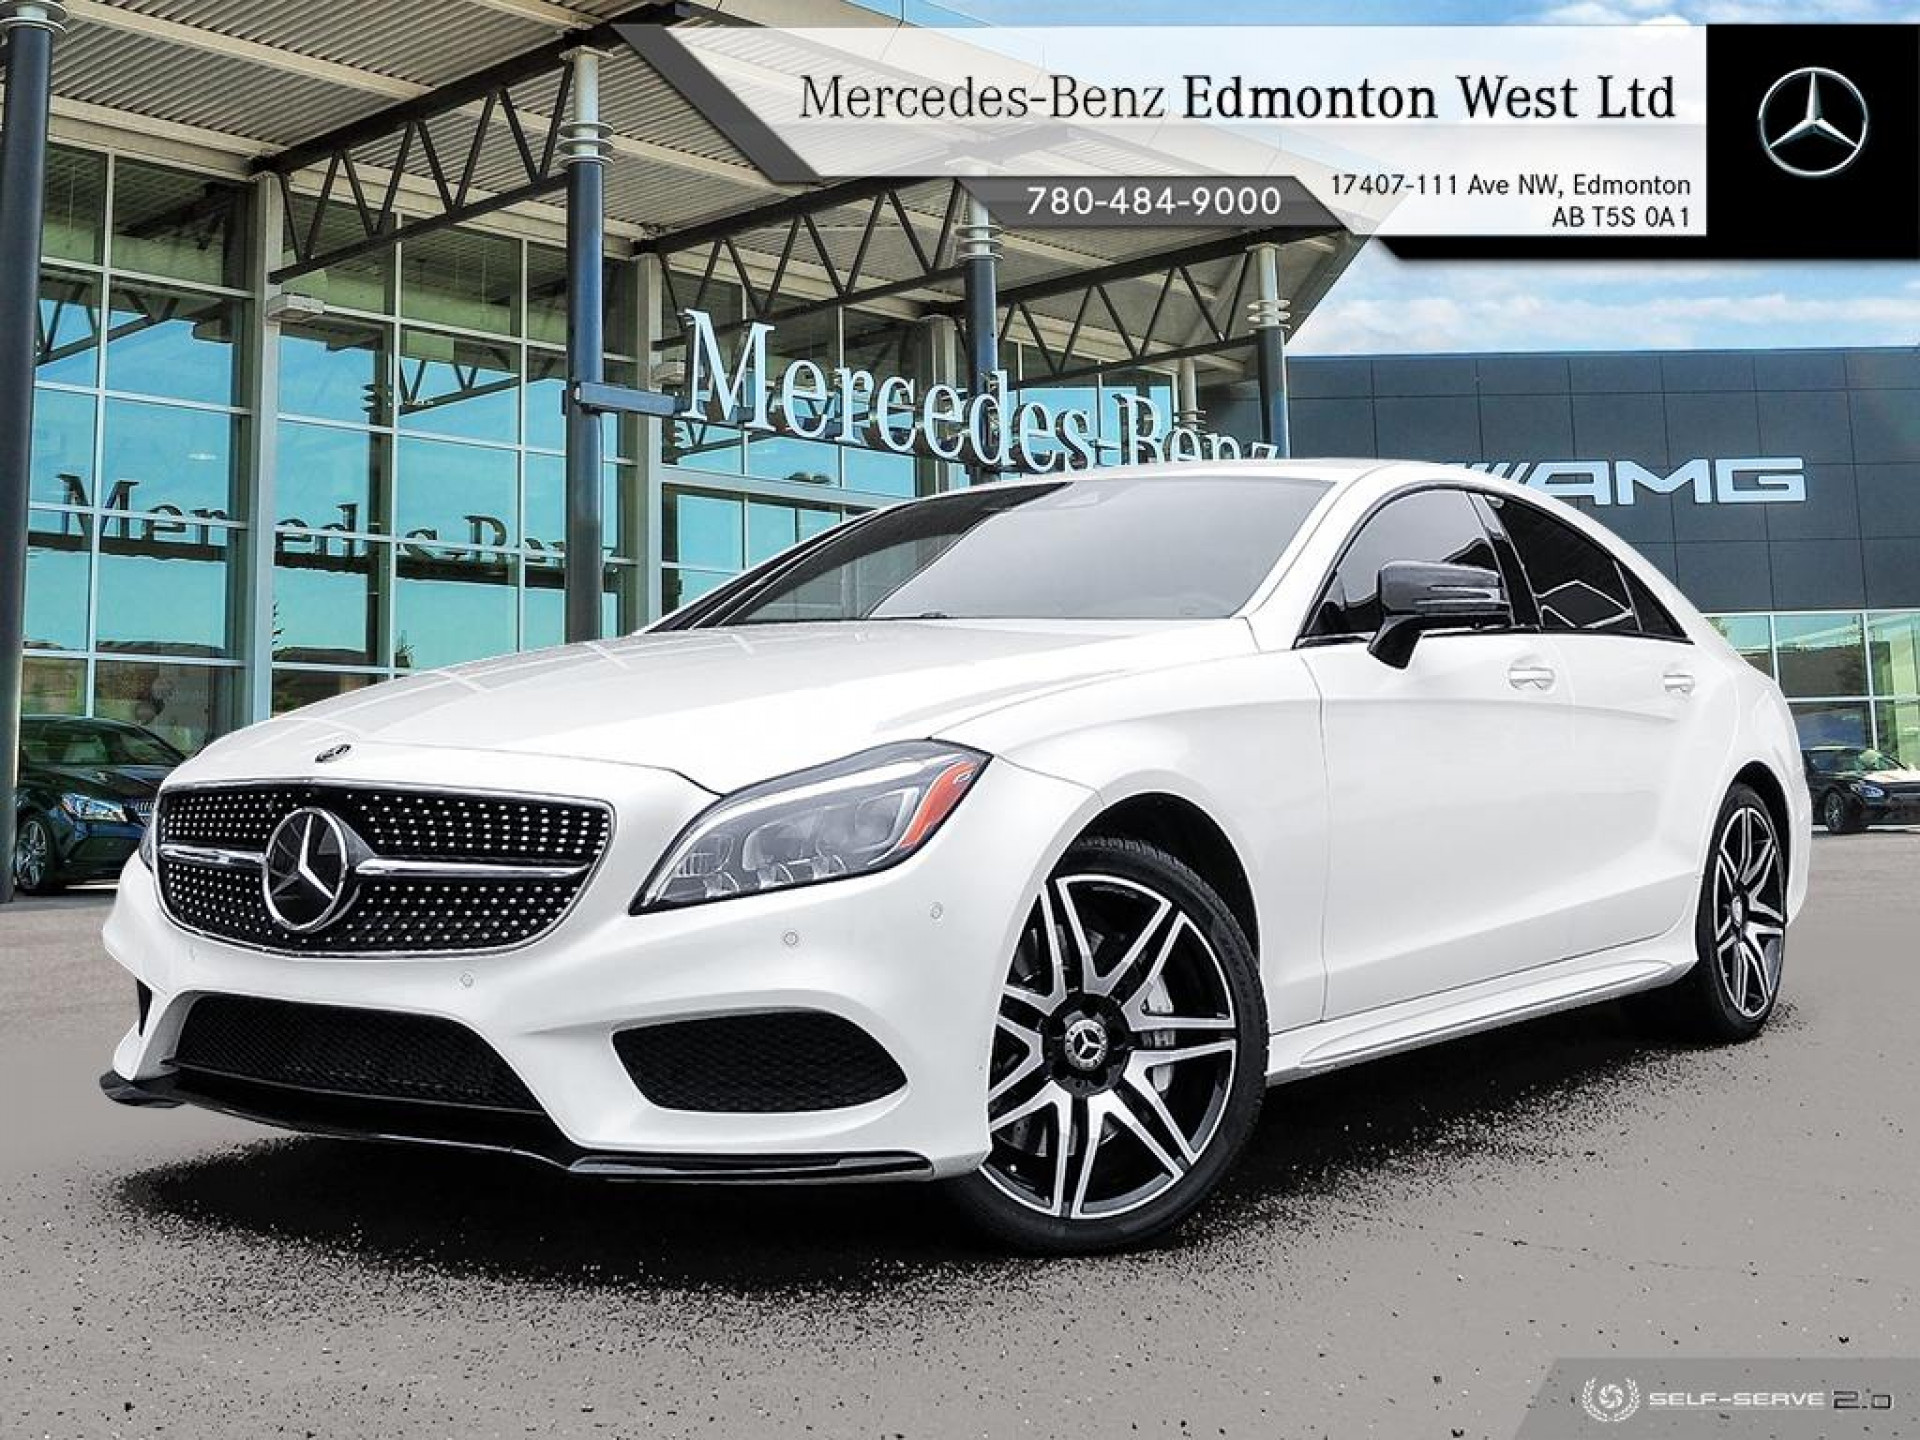 PreOwned 2017 Mercedes Benz CLS 550 Coupe Star Certified